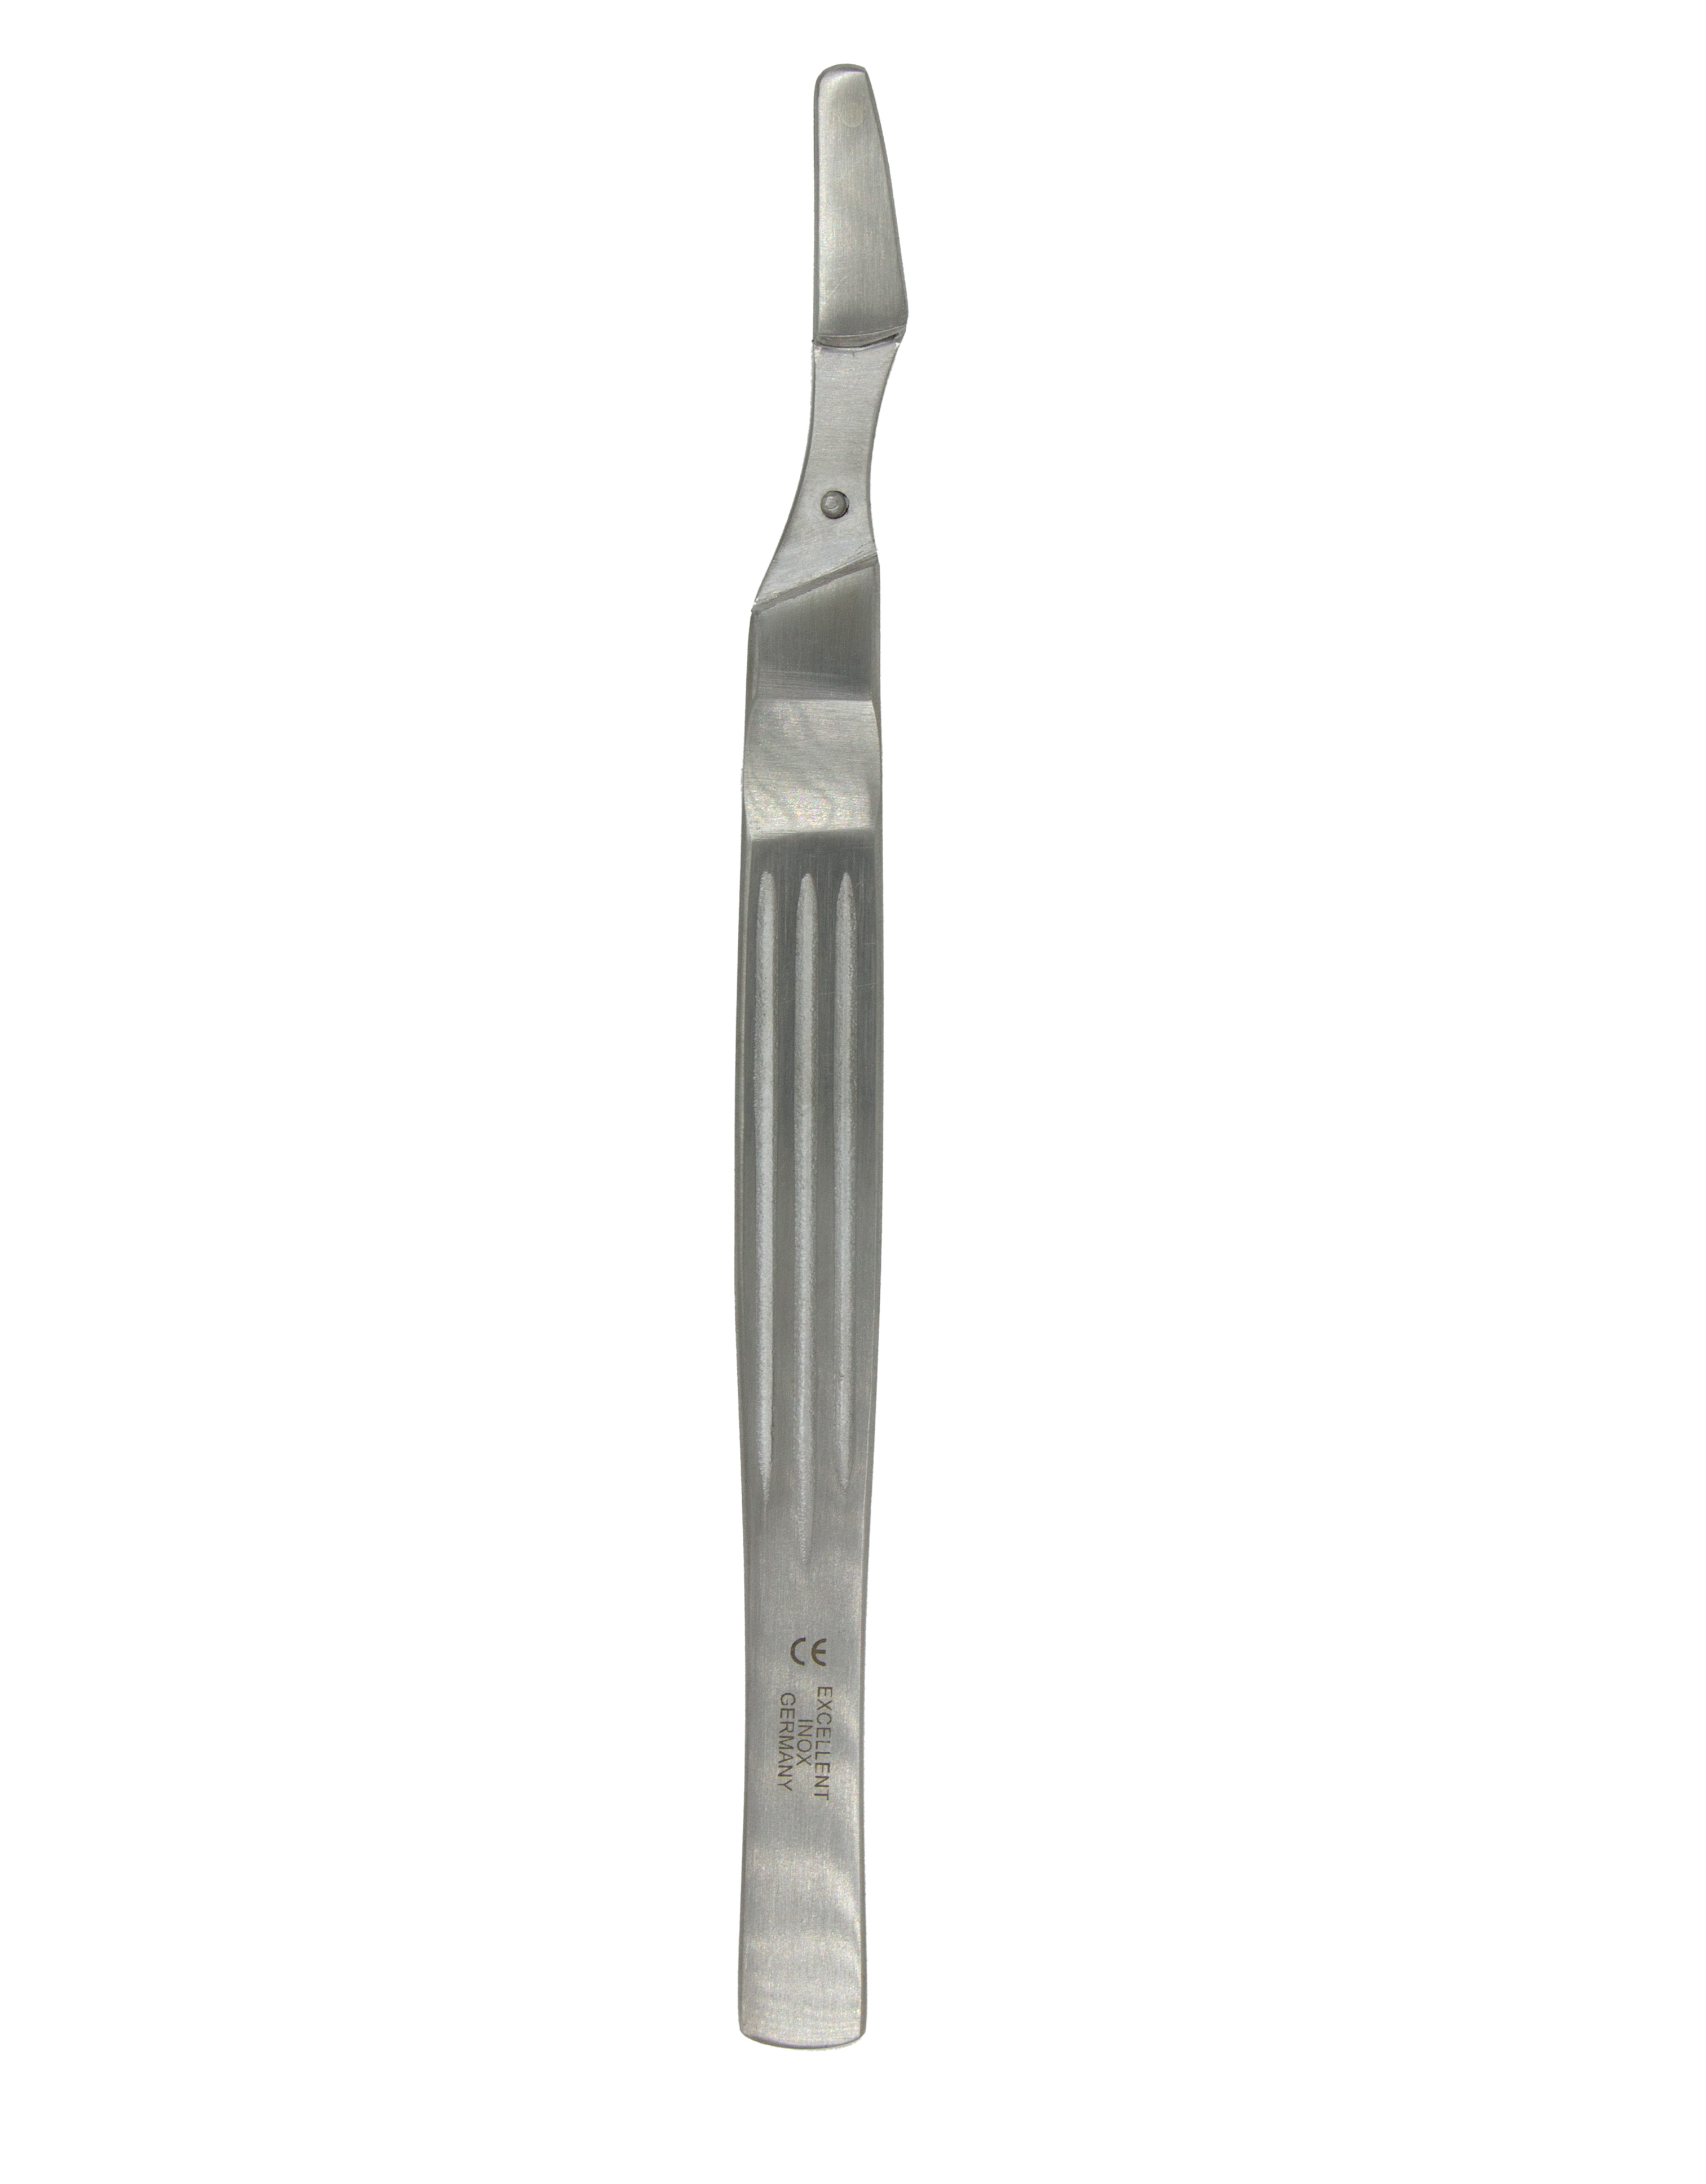 Excellent OR scalpel handle for OR blades